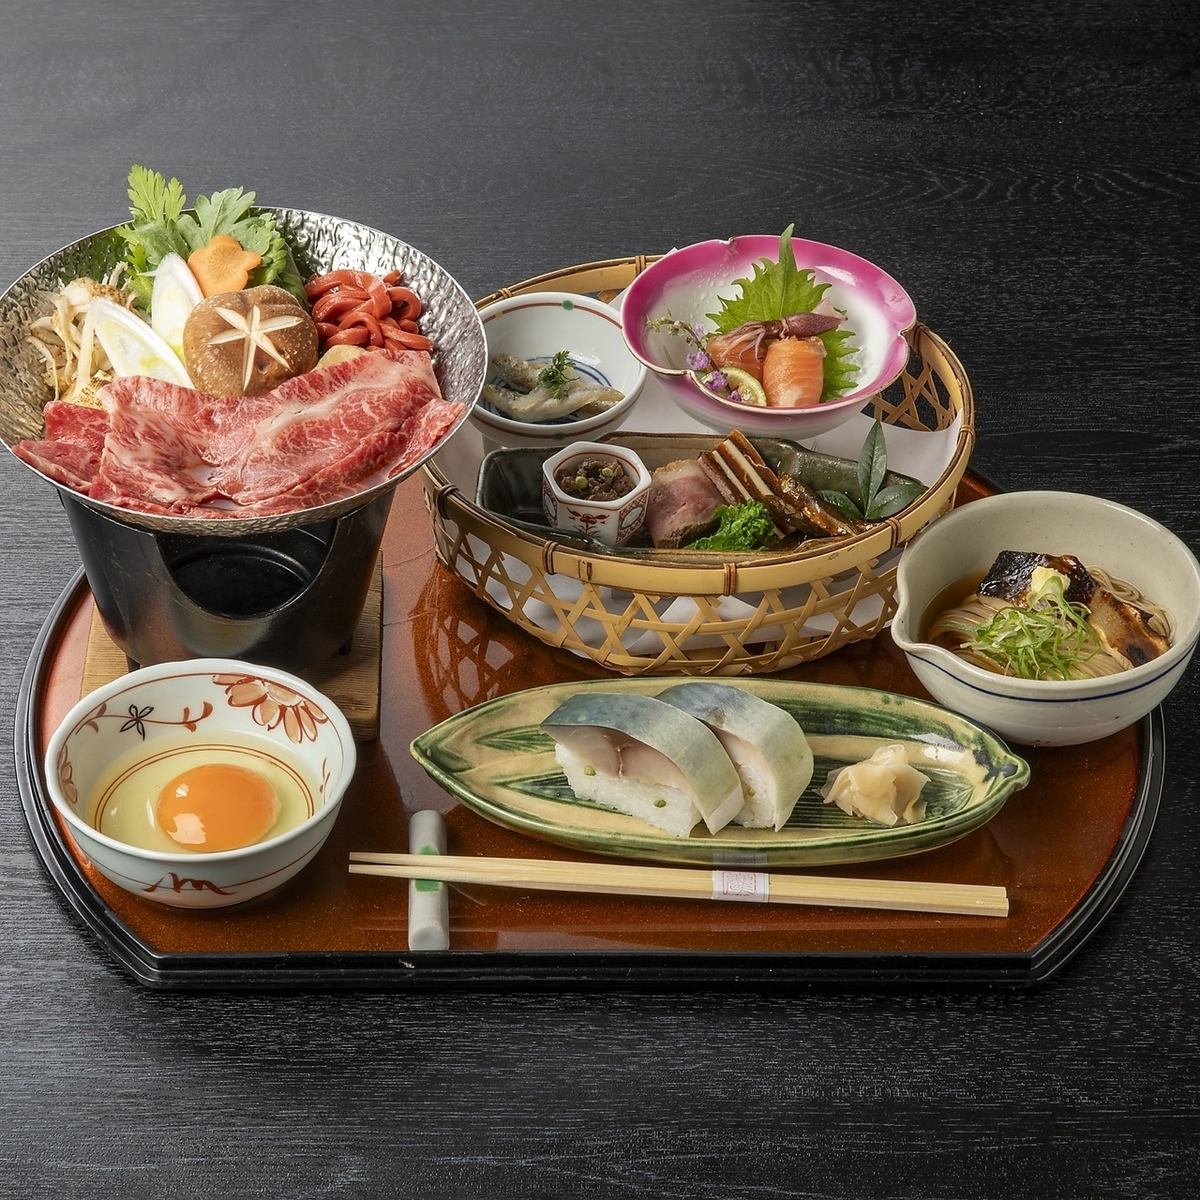 Lunch is a gozen meal, so you can casually enjoy our traditional flavors.